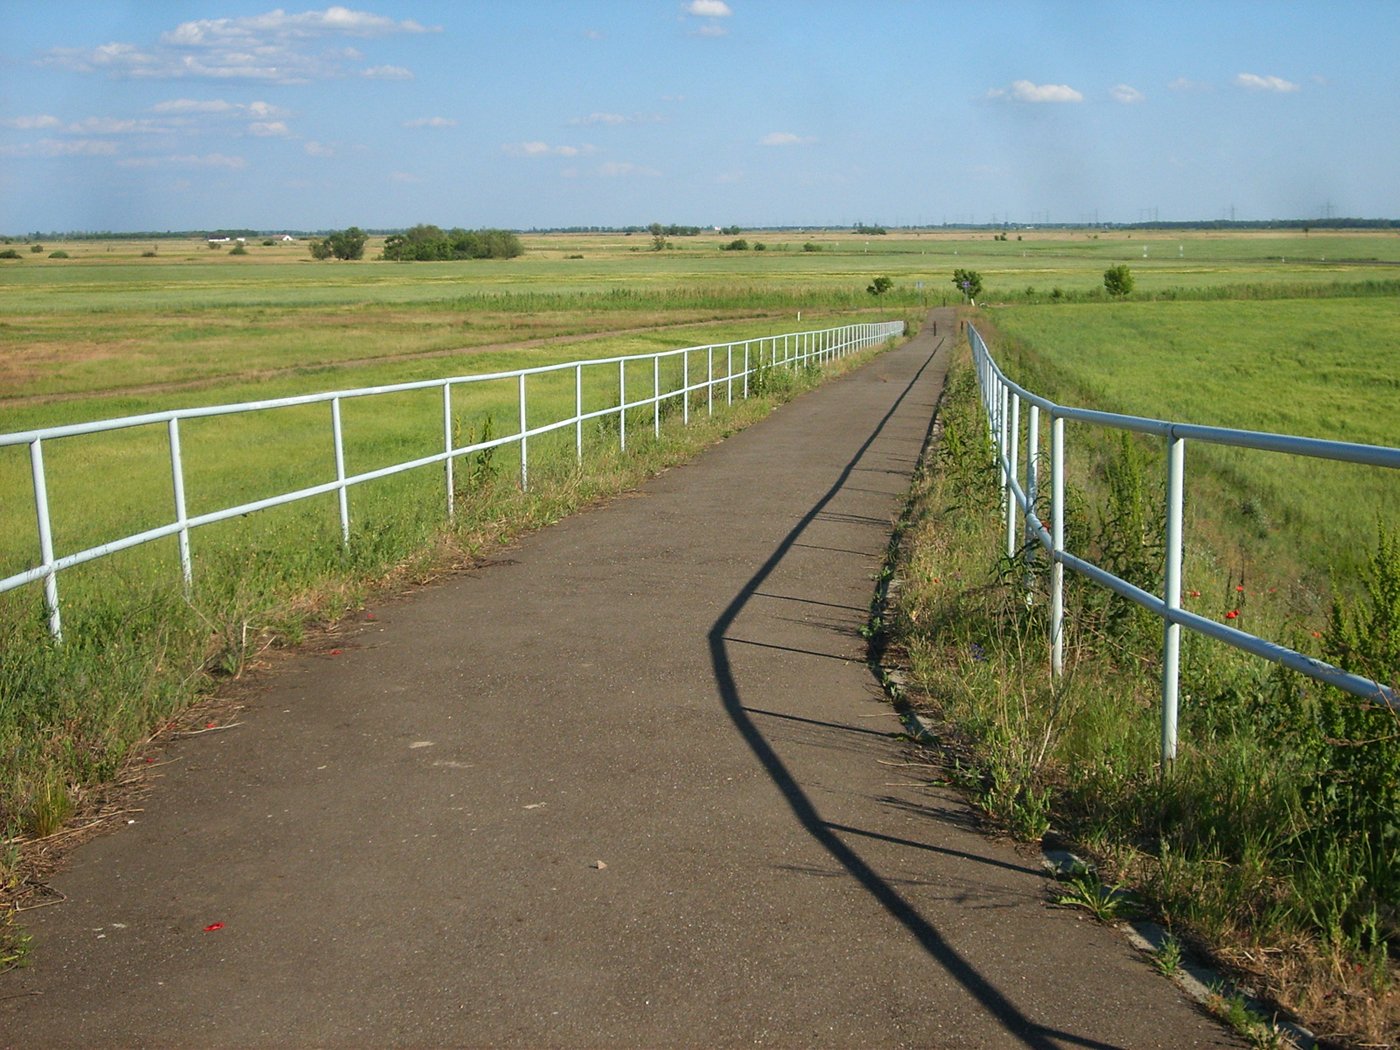 the fence line is along the path for people to walk on